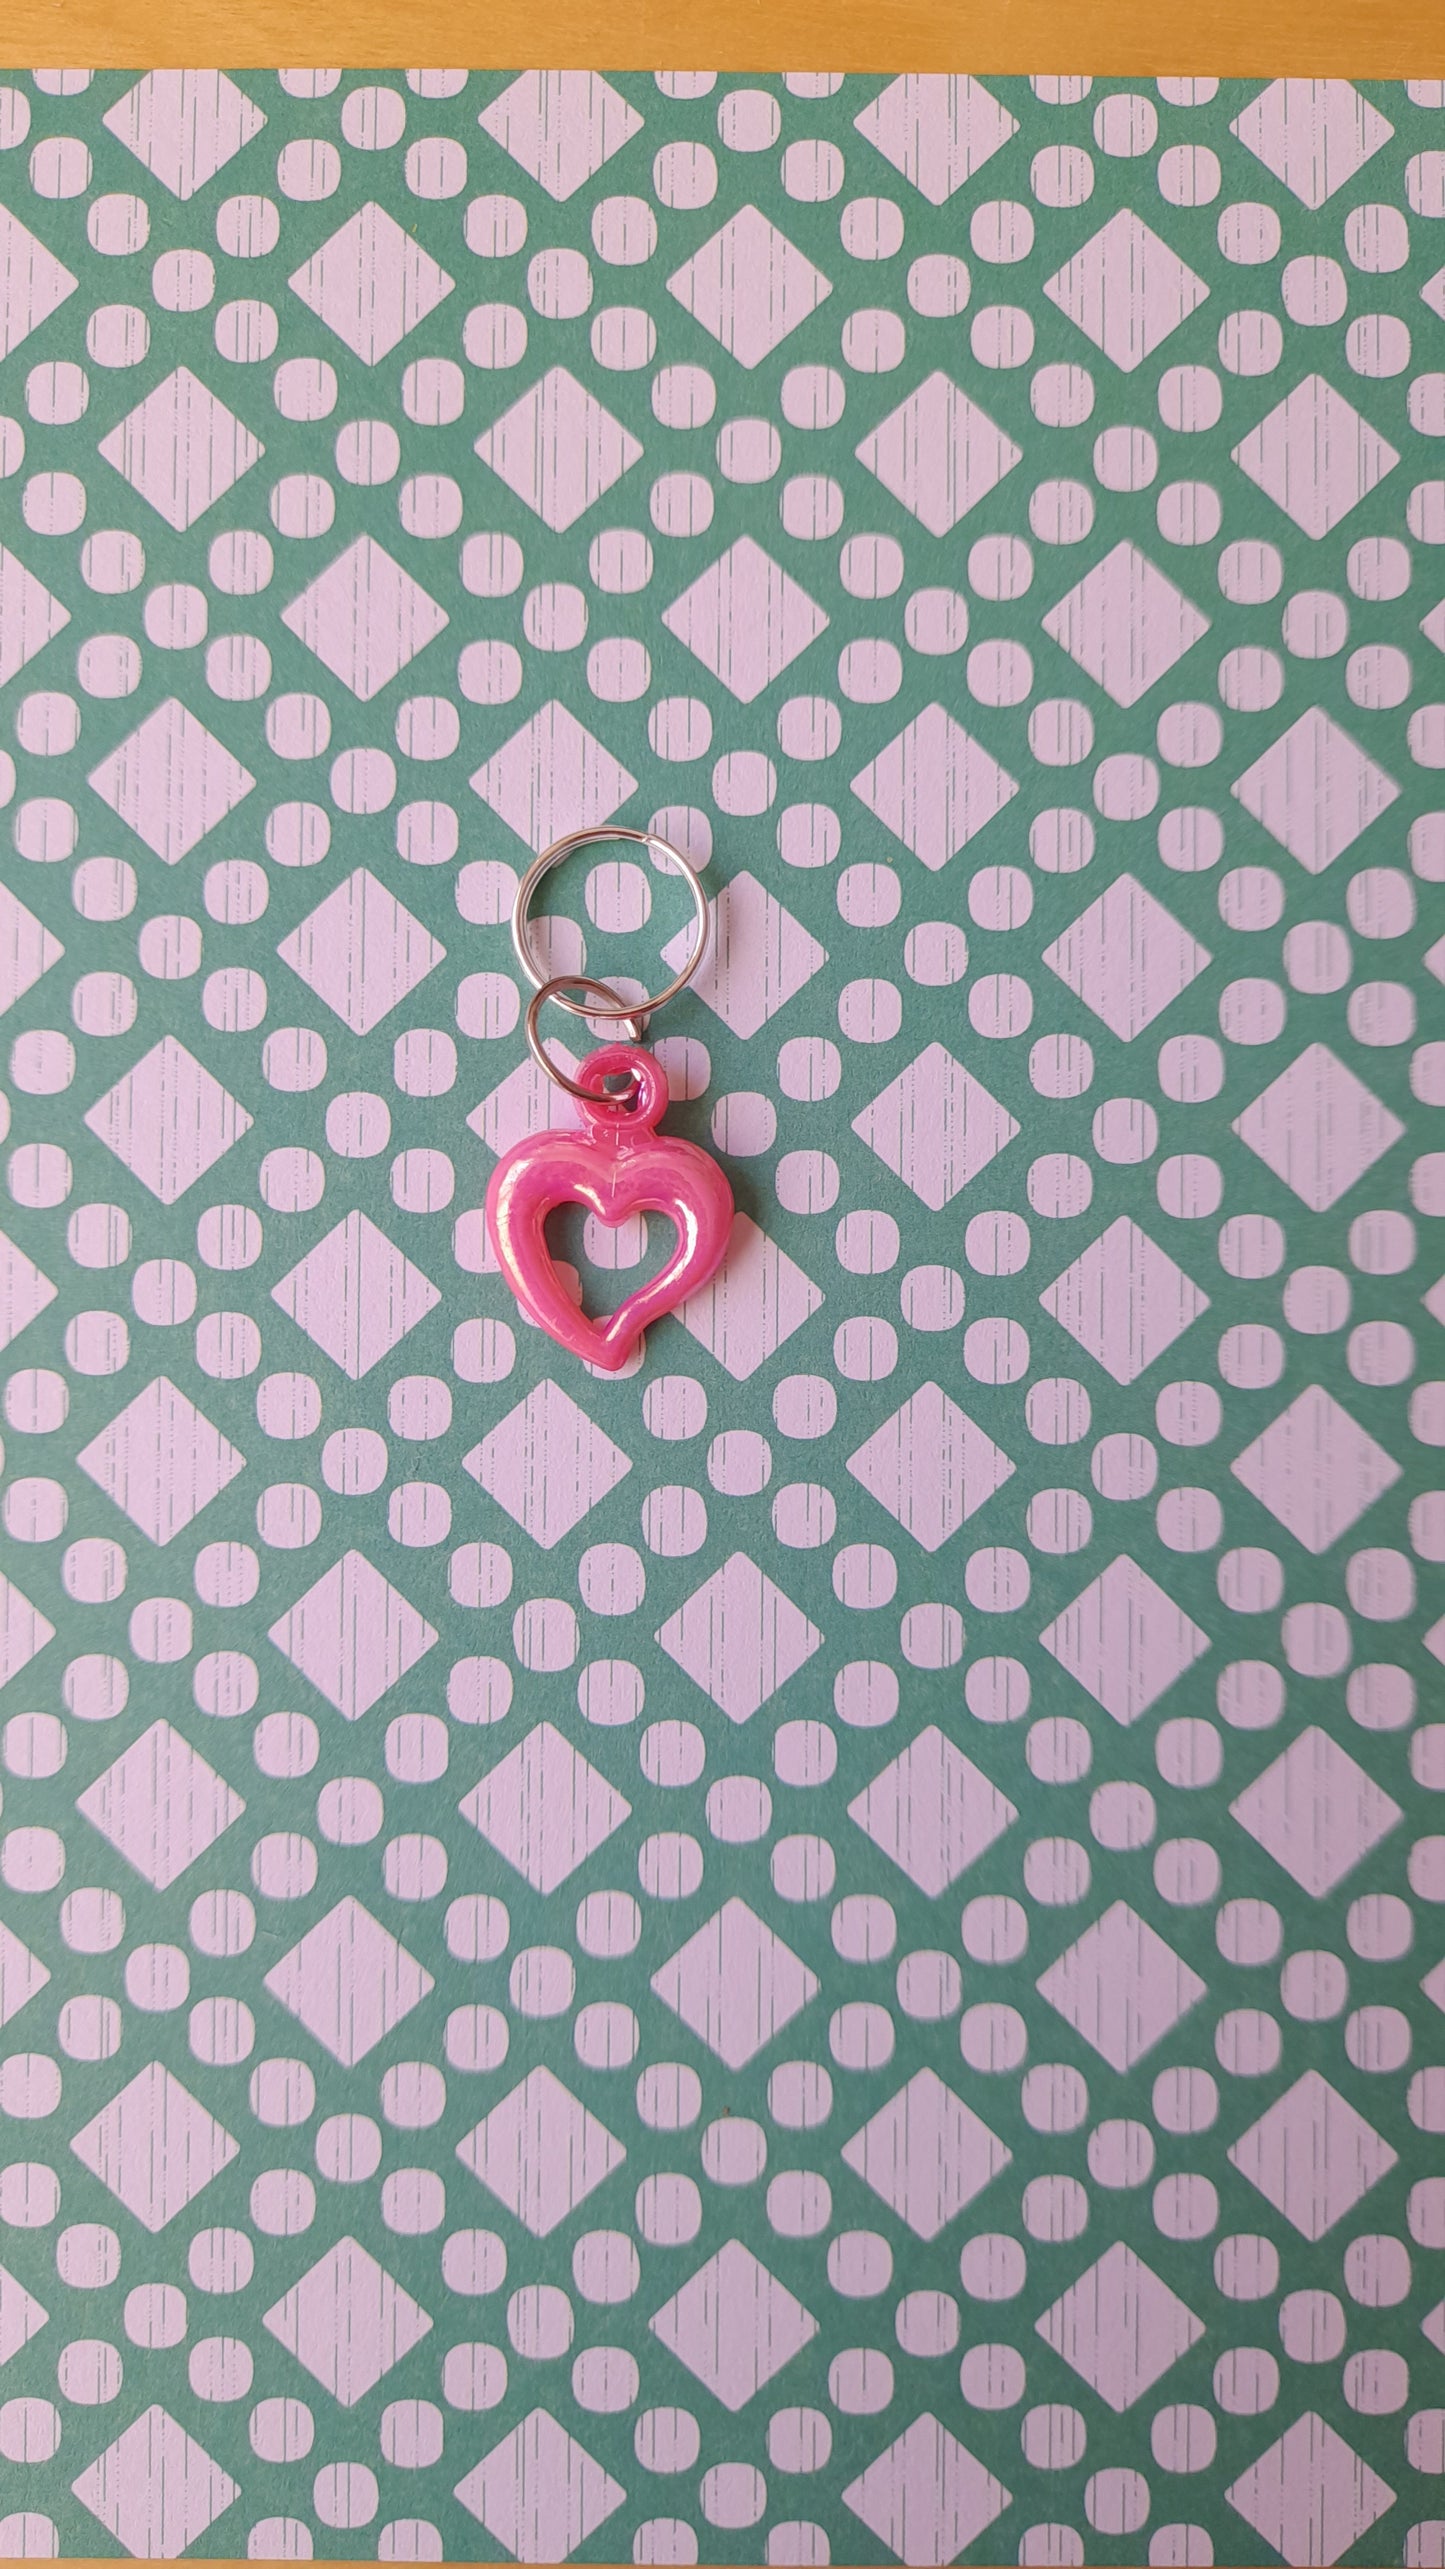 Funky heart stitch markers